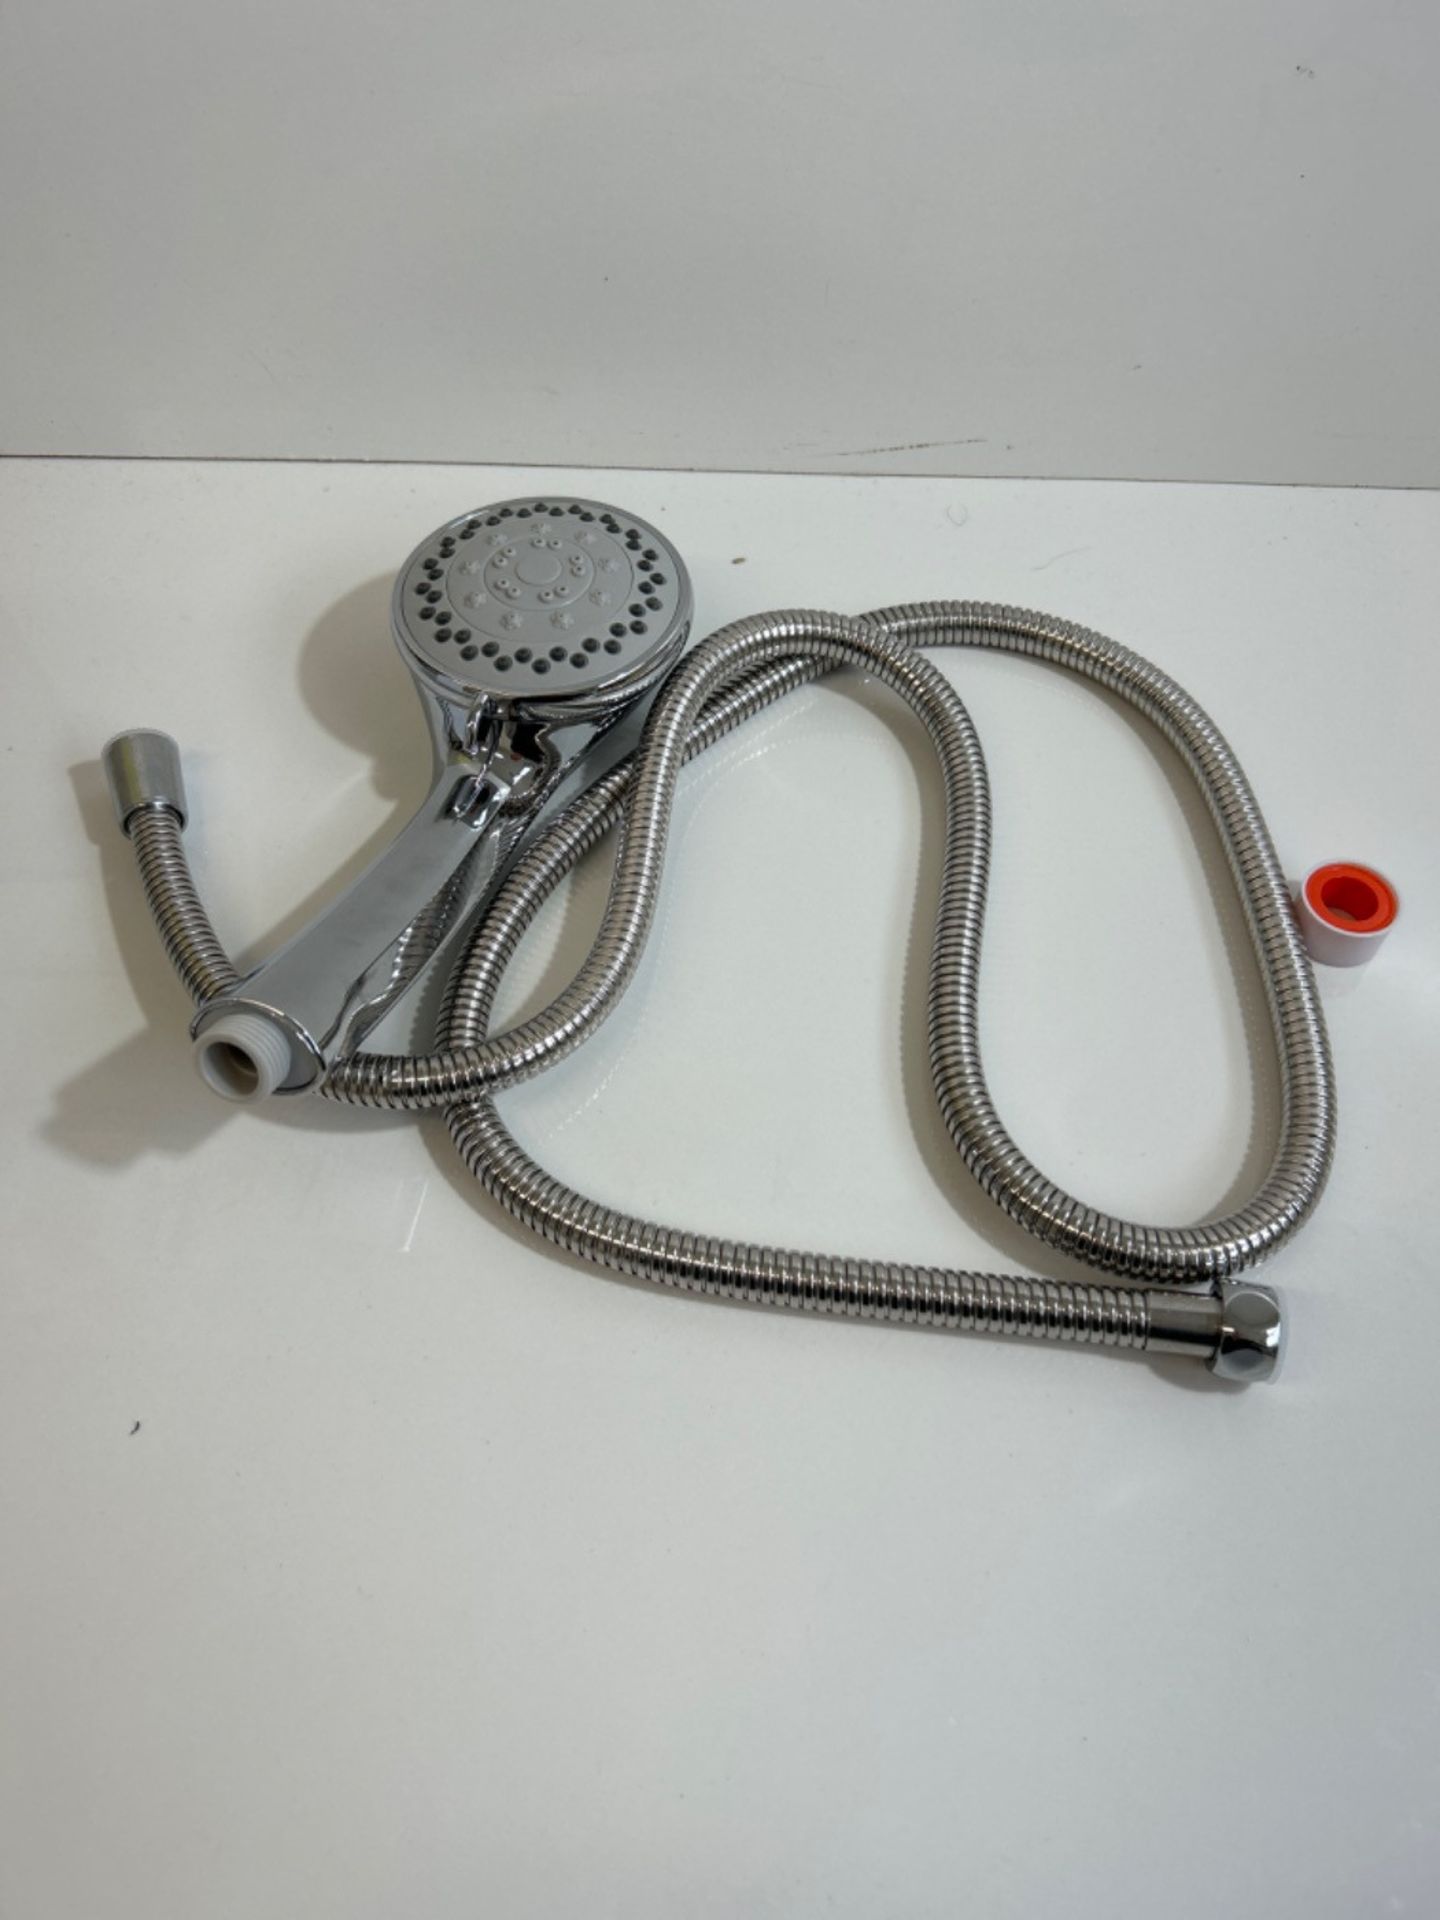 Shower Head,CUCM High Pressure 4 Spray Settings with Hose Adjustable Massage Spa Hand Held Showerhe - Image 2 of 3